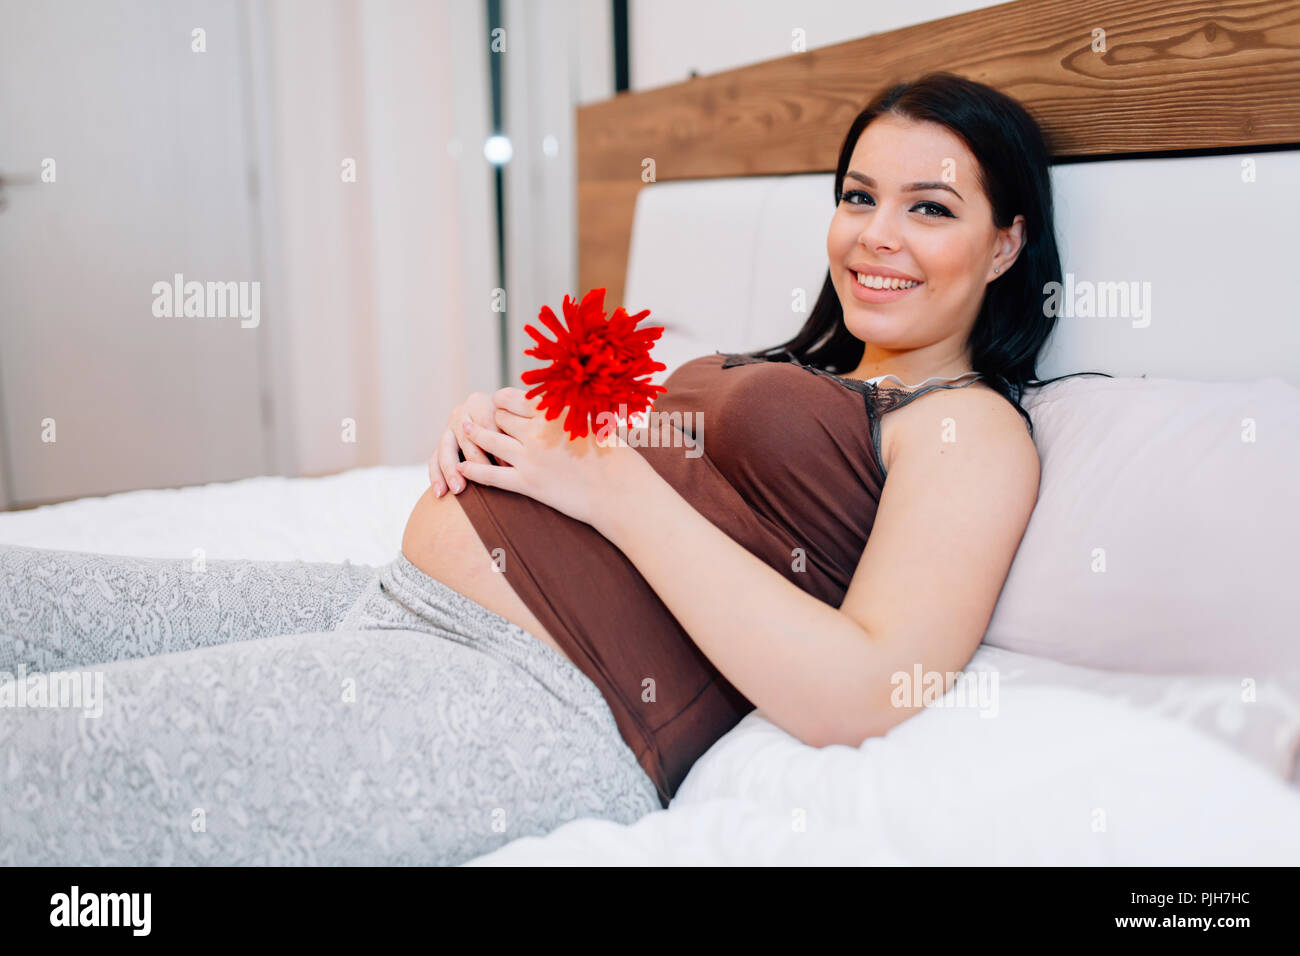 Pregnant woman happy for flower Stock Photo